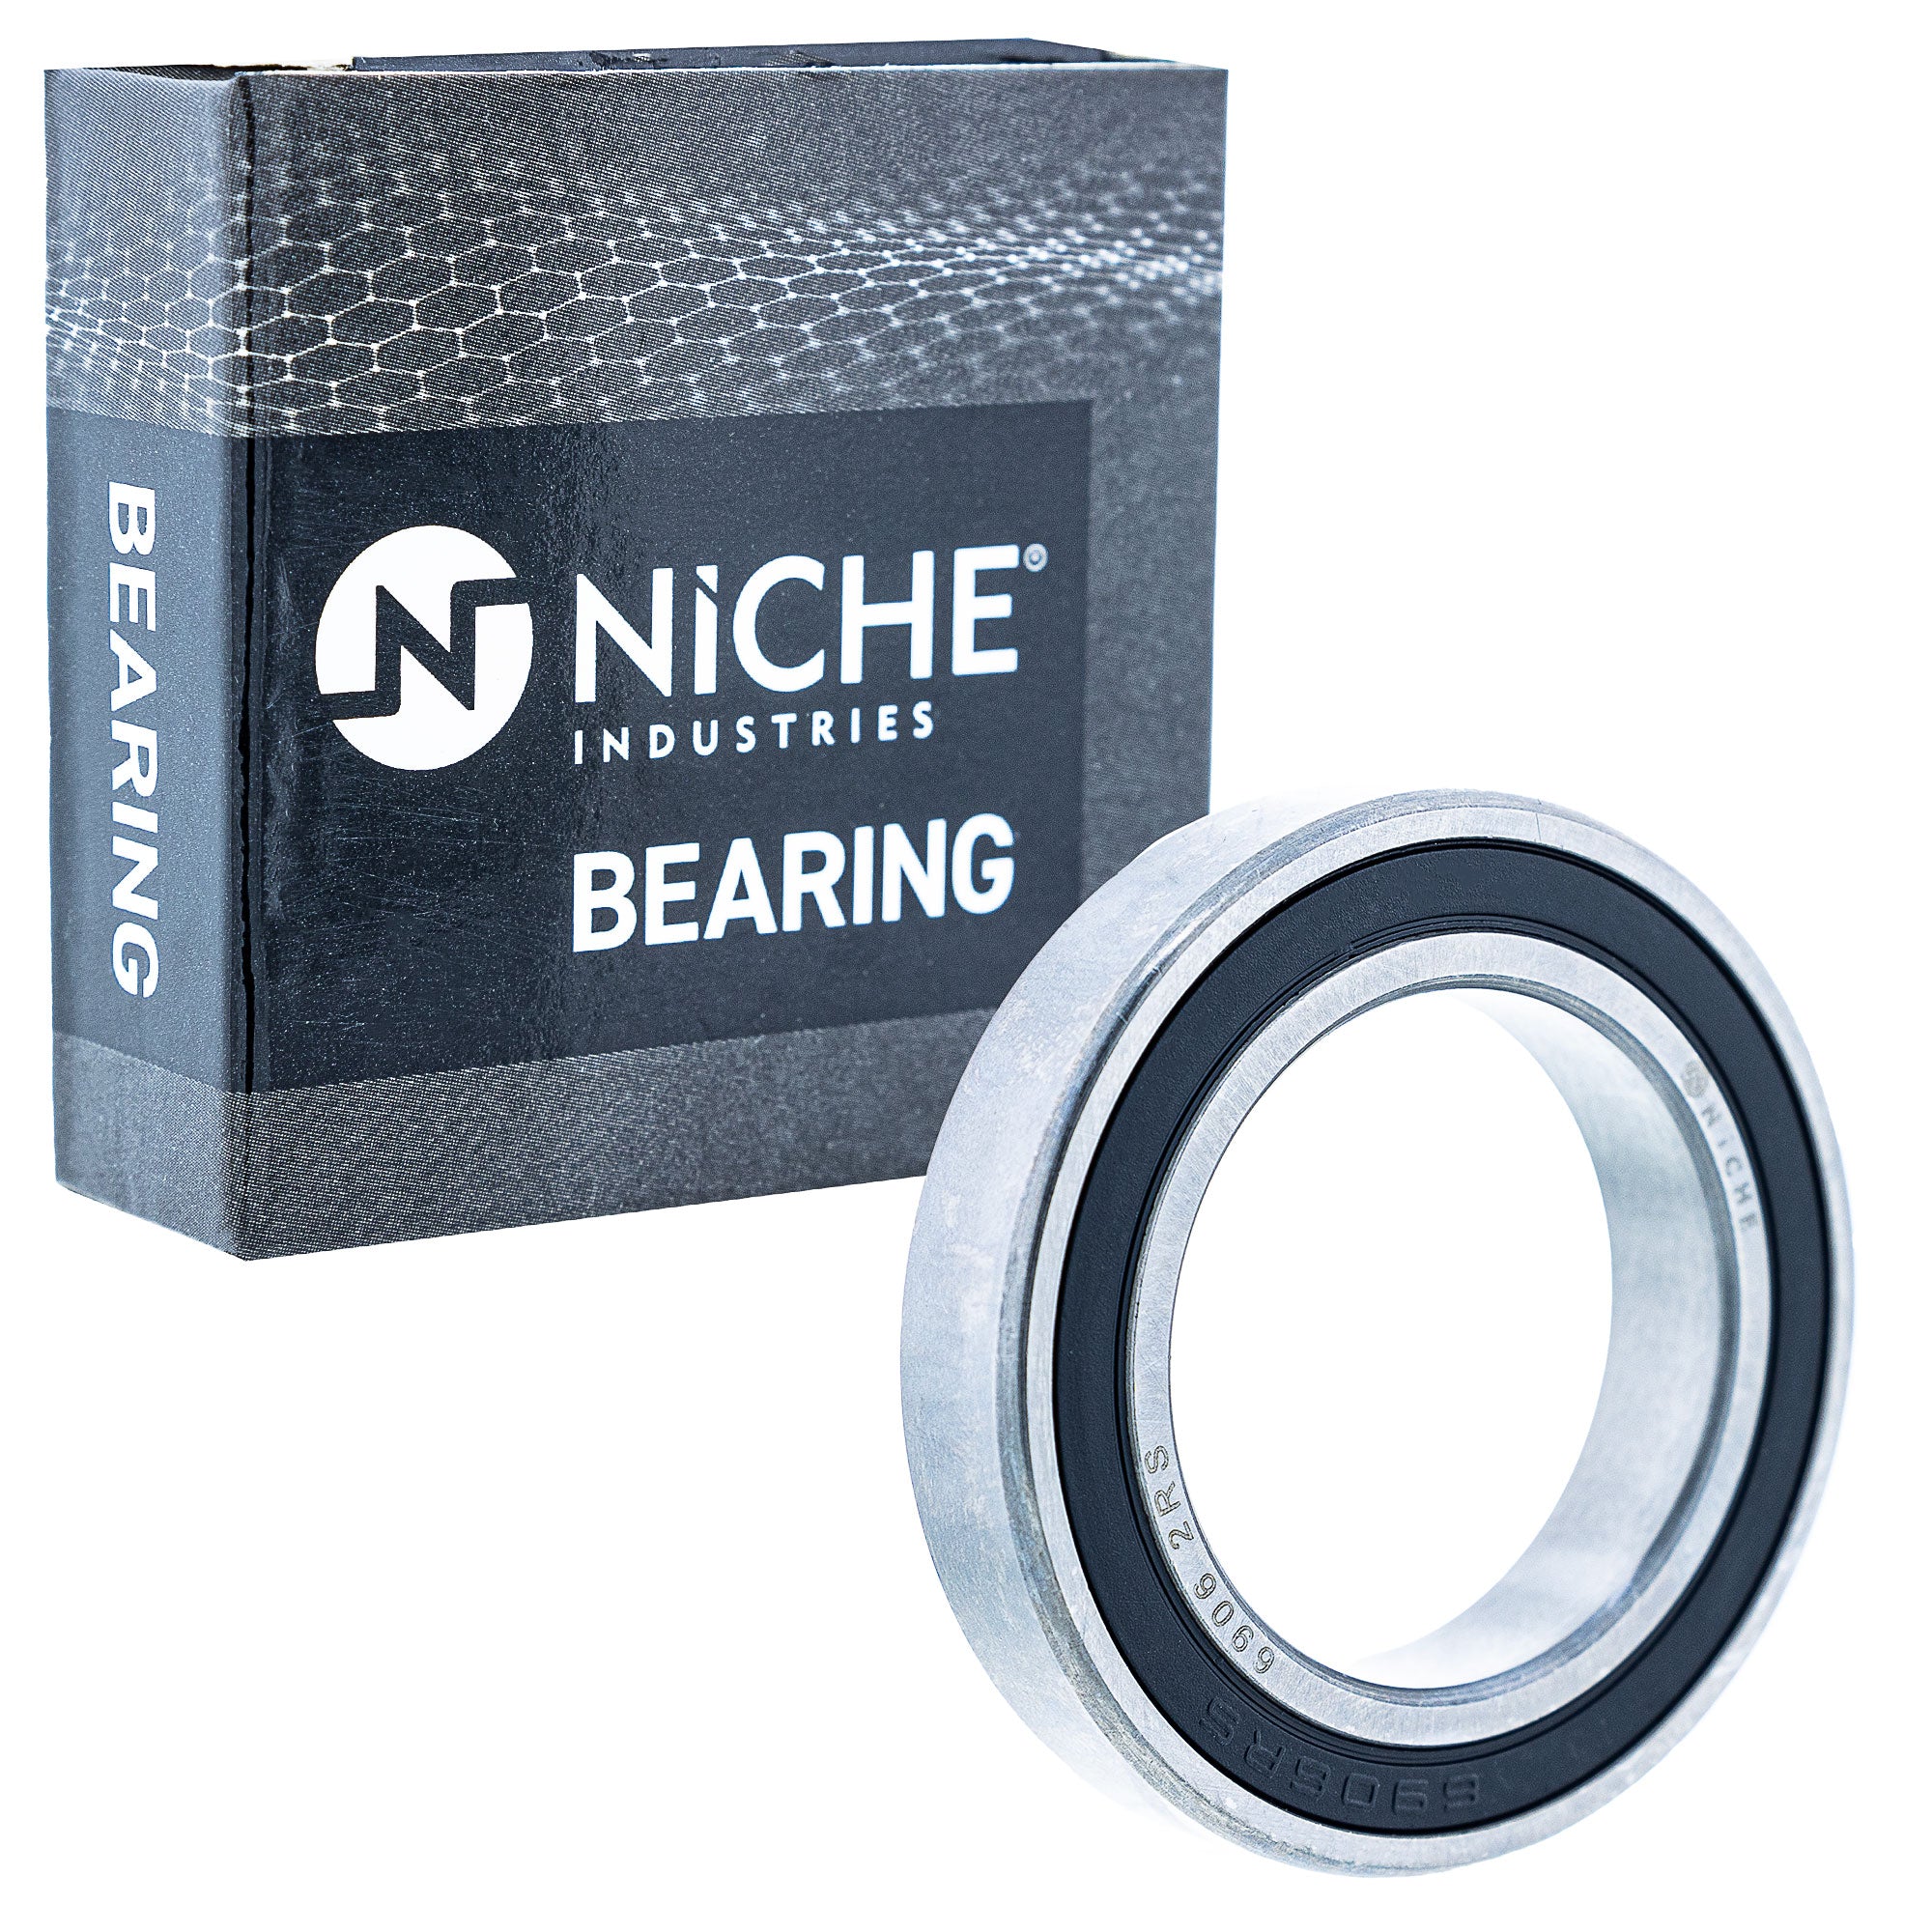 NICHE 519-CBB2250R Bearing 2-Pack for zOTHER